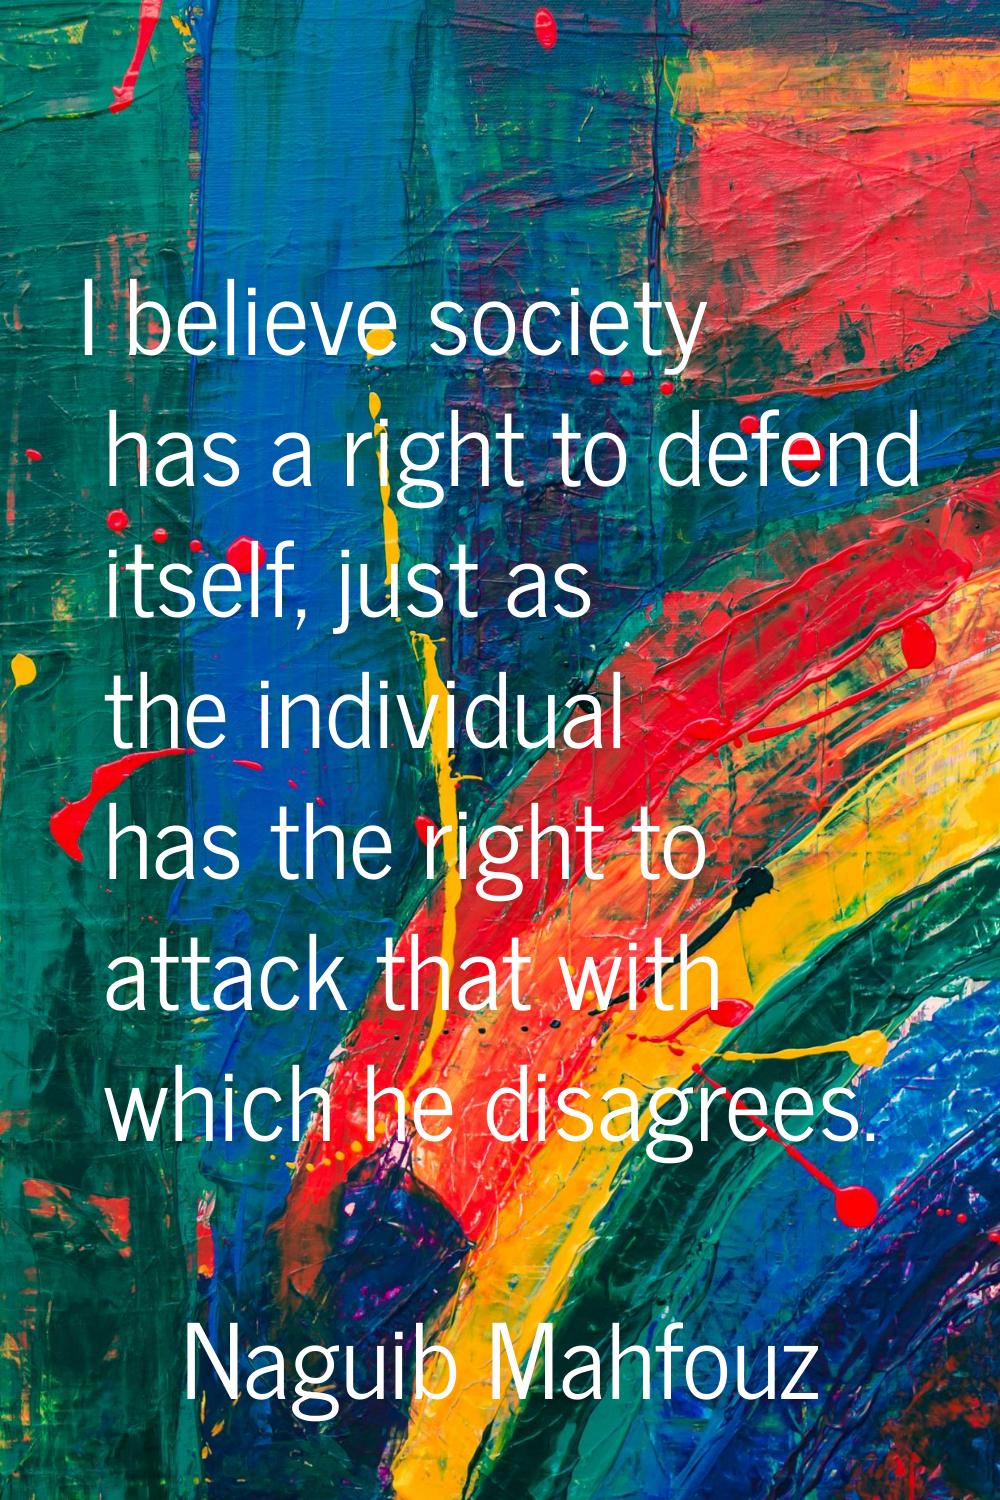 I believe society has a right to defend itself, just as the individual has the right to attack that